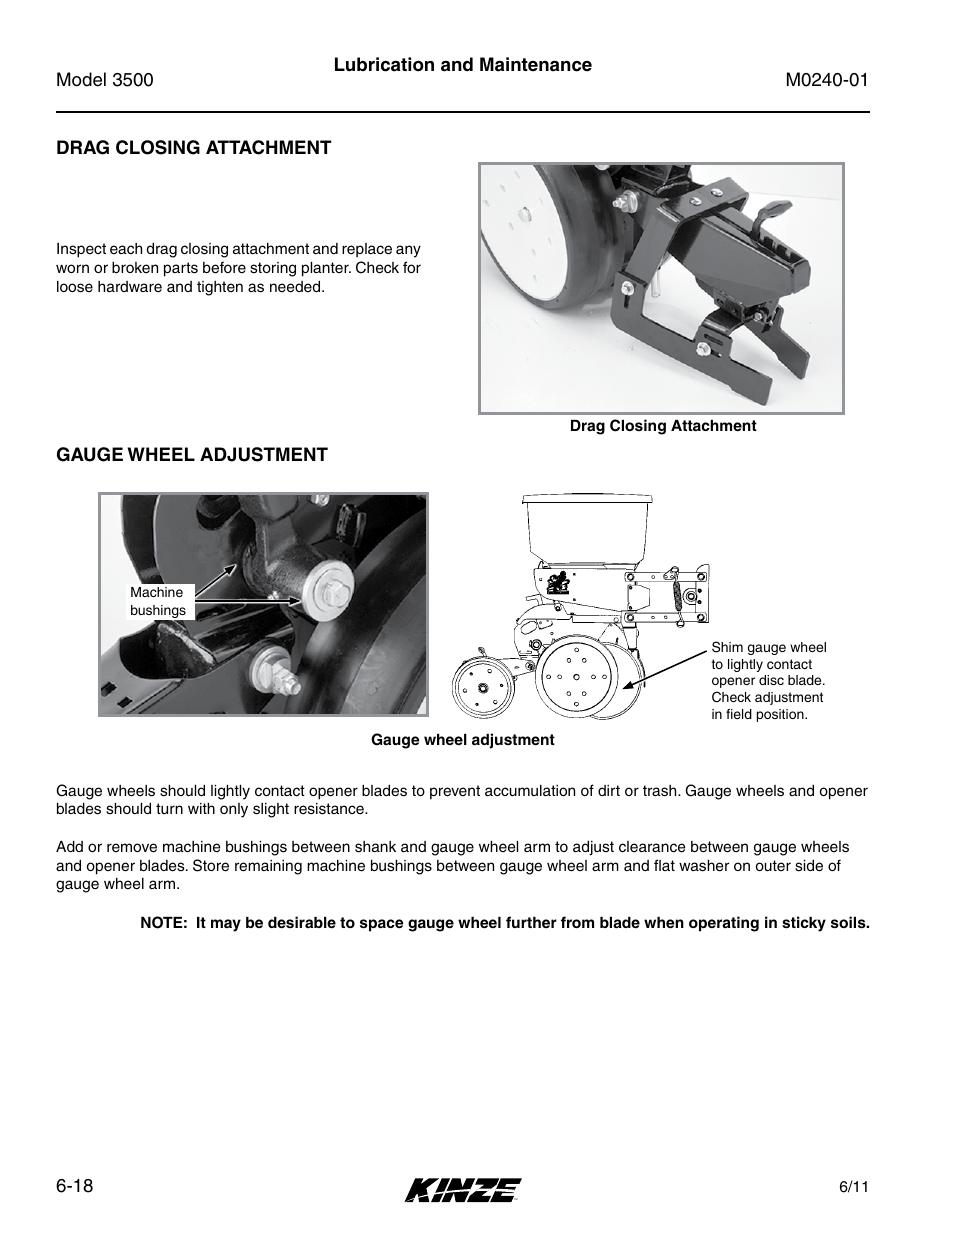 Kinze 3500 Lift and Rotate Planter Rev. 7/14 User Manual | Page 114 / 140